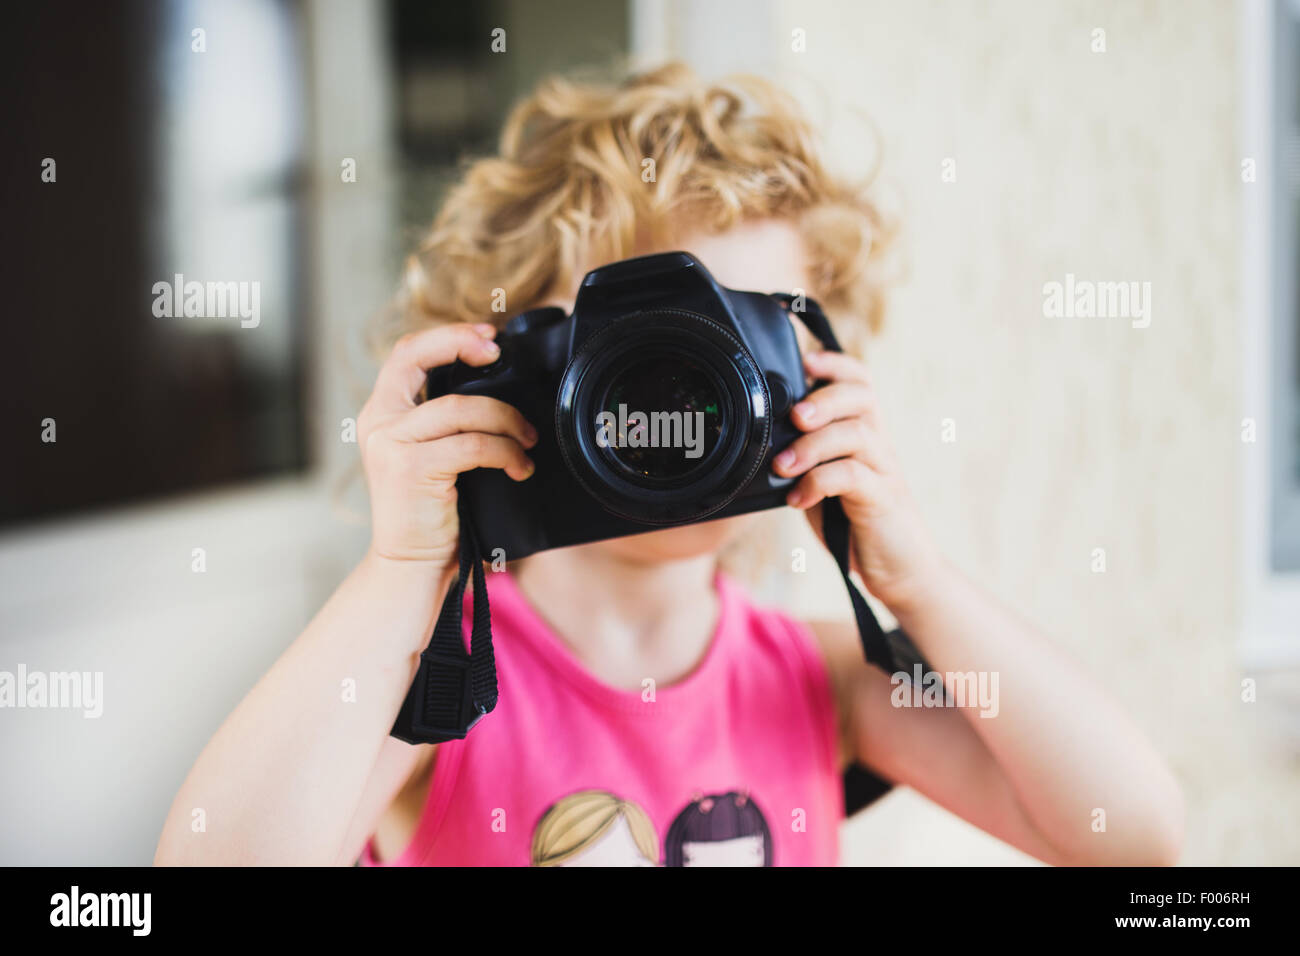 Little girl taking picture with SLR camera Stock Photo